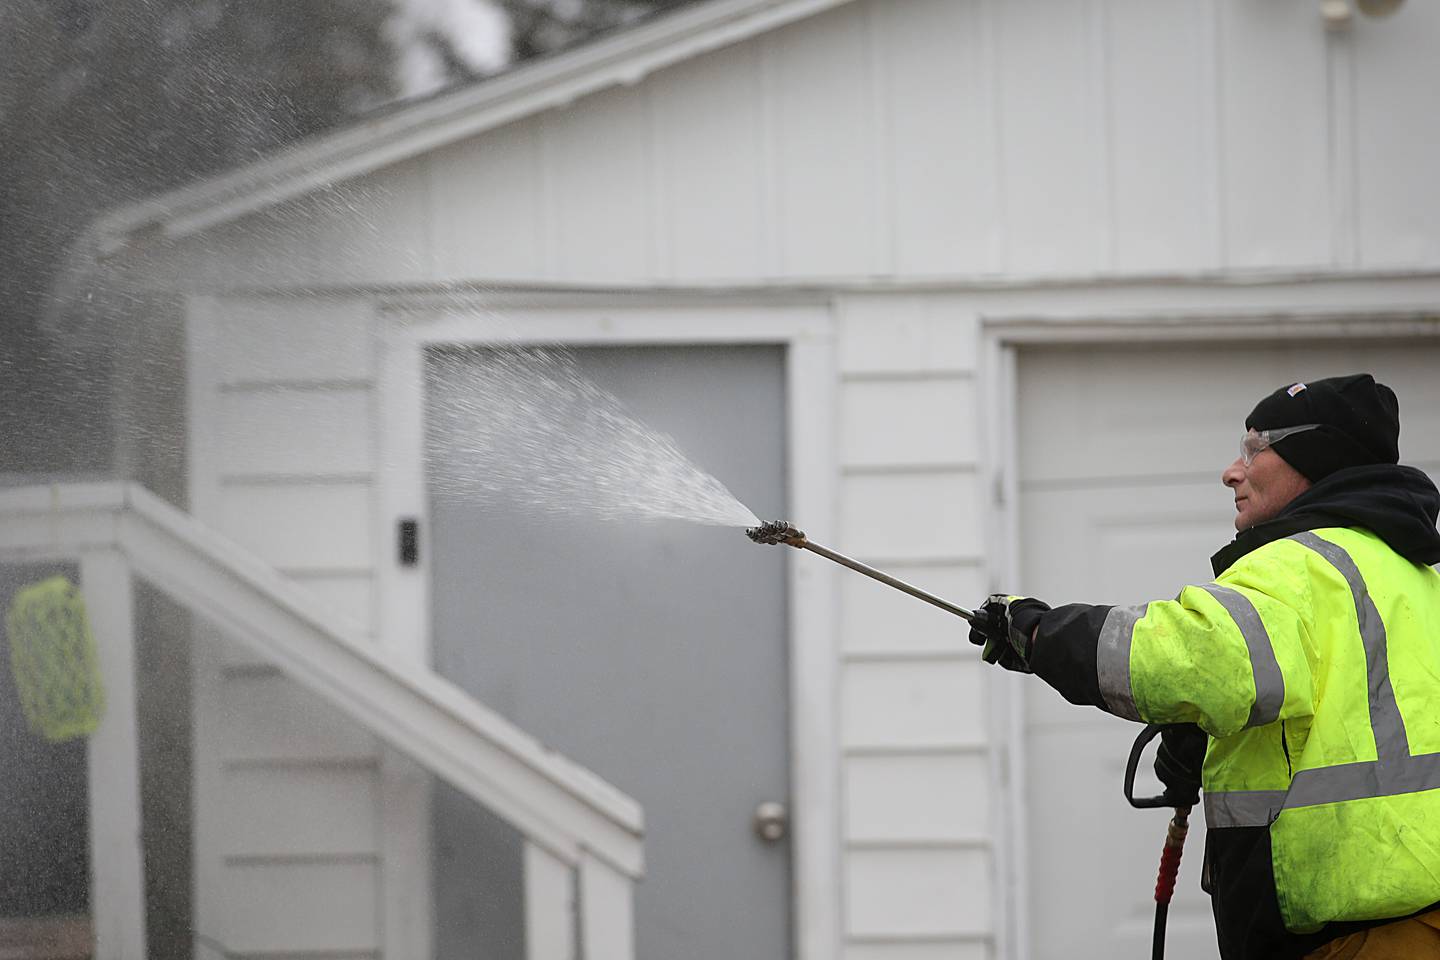 Jim Mennie owner of Precision Washing Exterior Washing, uses a power washer to rinse off the siding of a home on Porter Street on Wednesday, Jan. 18, 2023 in La Salle. Residences who were affected by the Carus Chemical fire can have their homes washed. Carus has approved contractors available to assist with washing. Contact the Carus hotline at 815-224-6662 to get on their list.